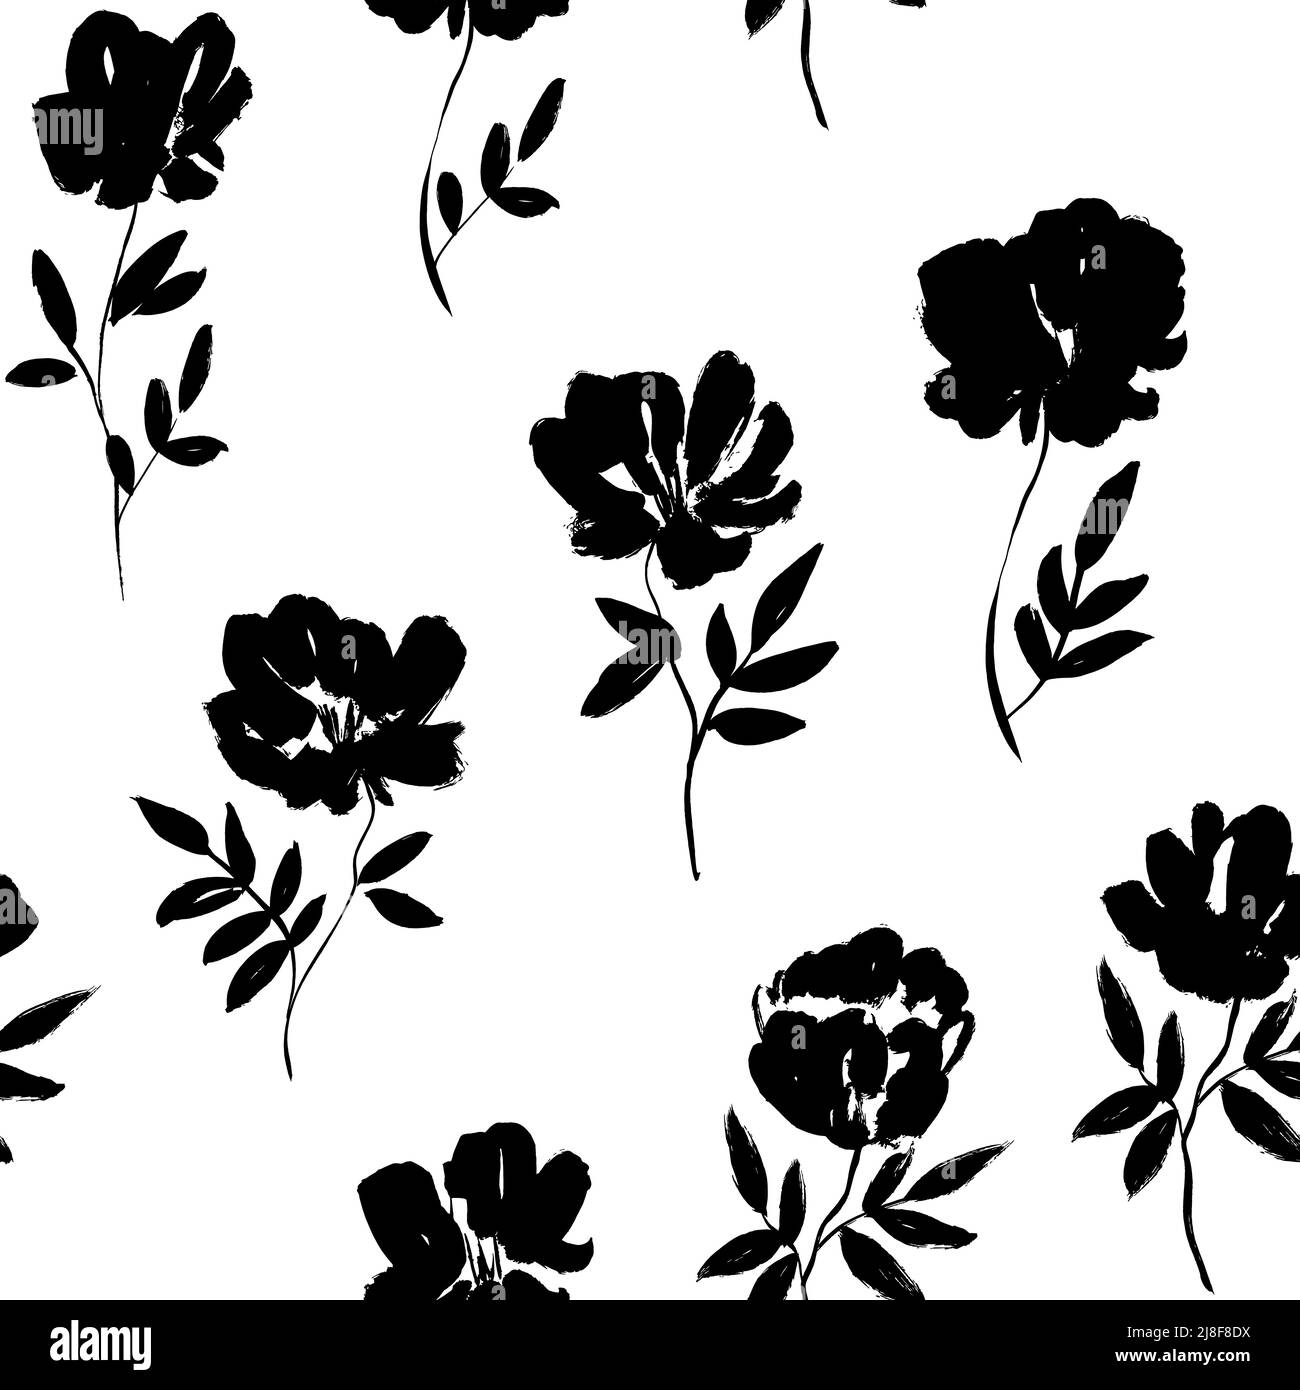 Ink drawing wild plants, herbs and flowers. Stock Vector